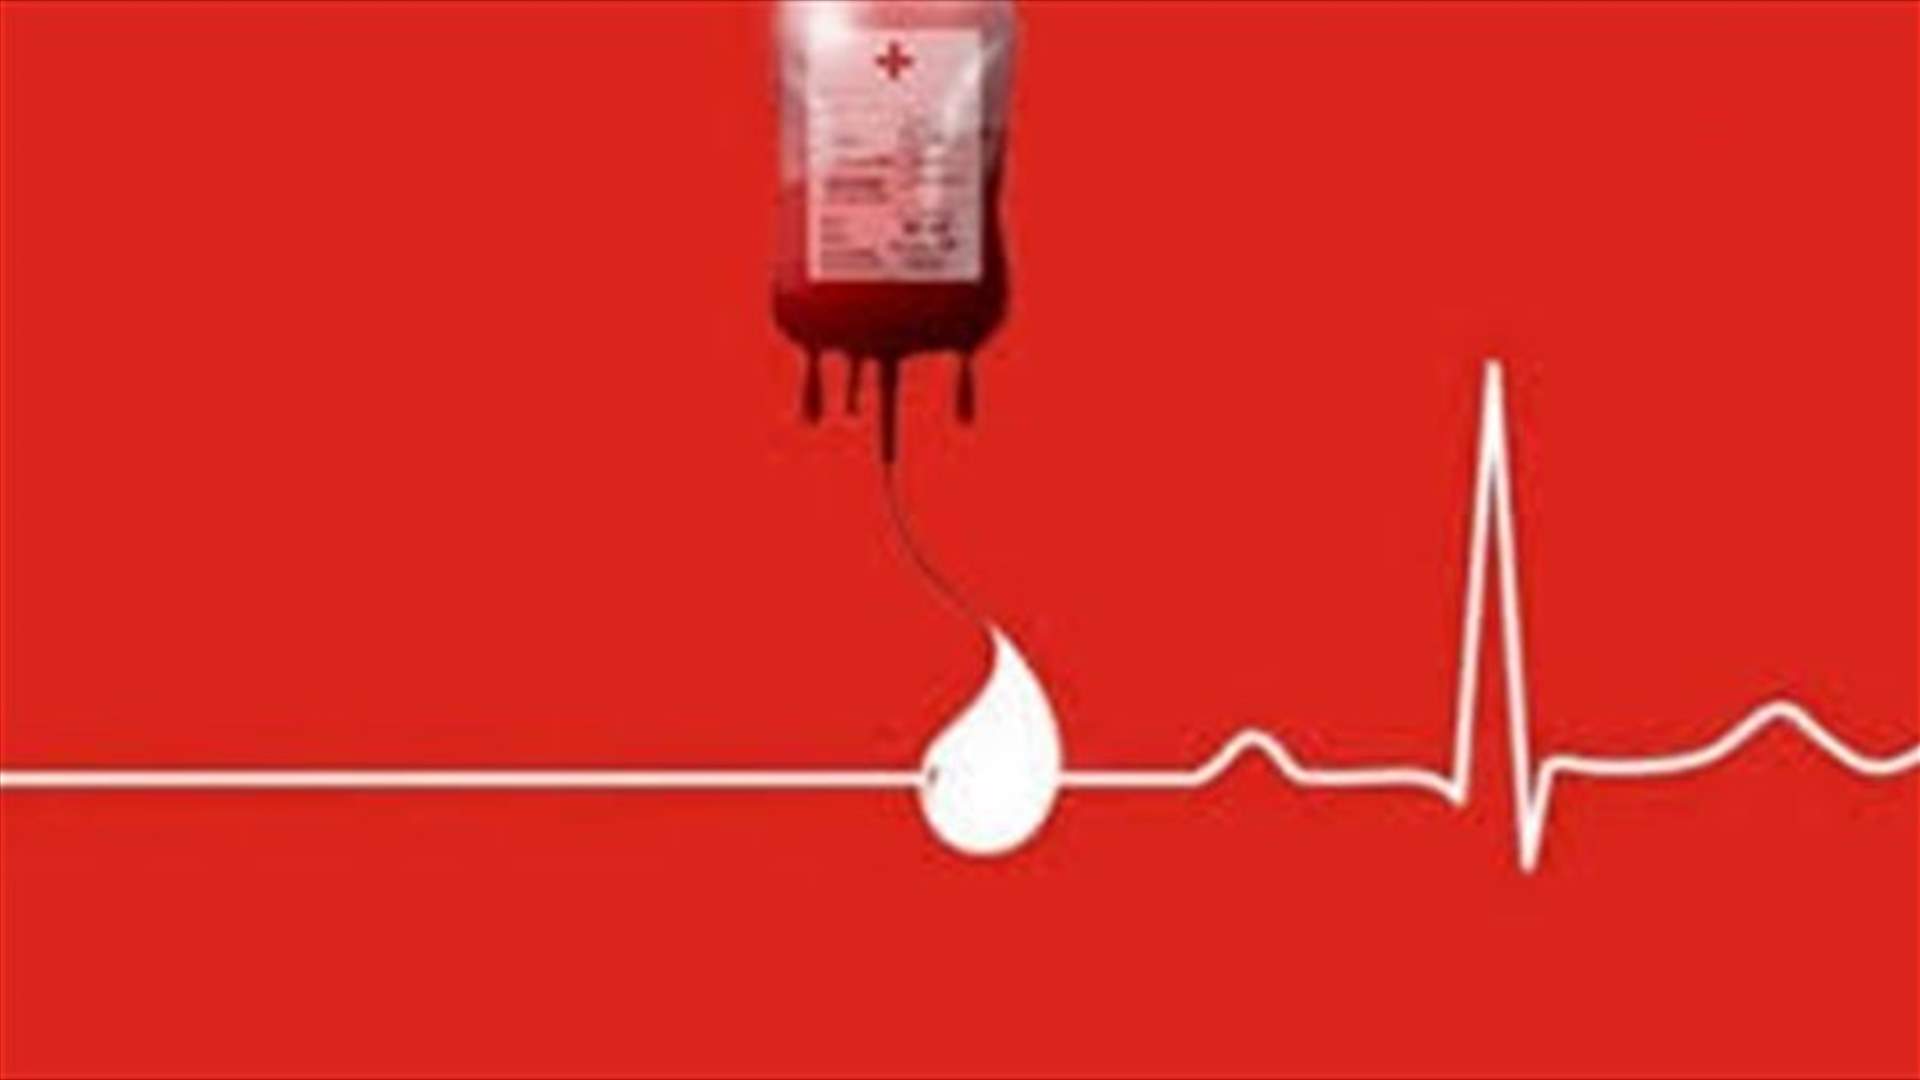 A newborn needs AB+ or O- blood type. To donate at the Lebanese Red Cross Rabieh or Spears, please call: 70/942995